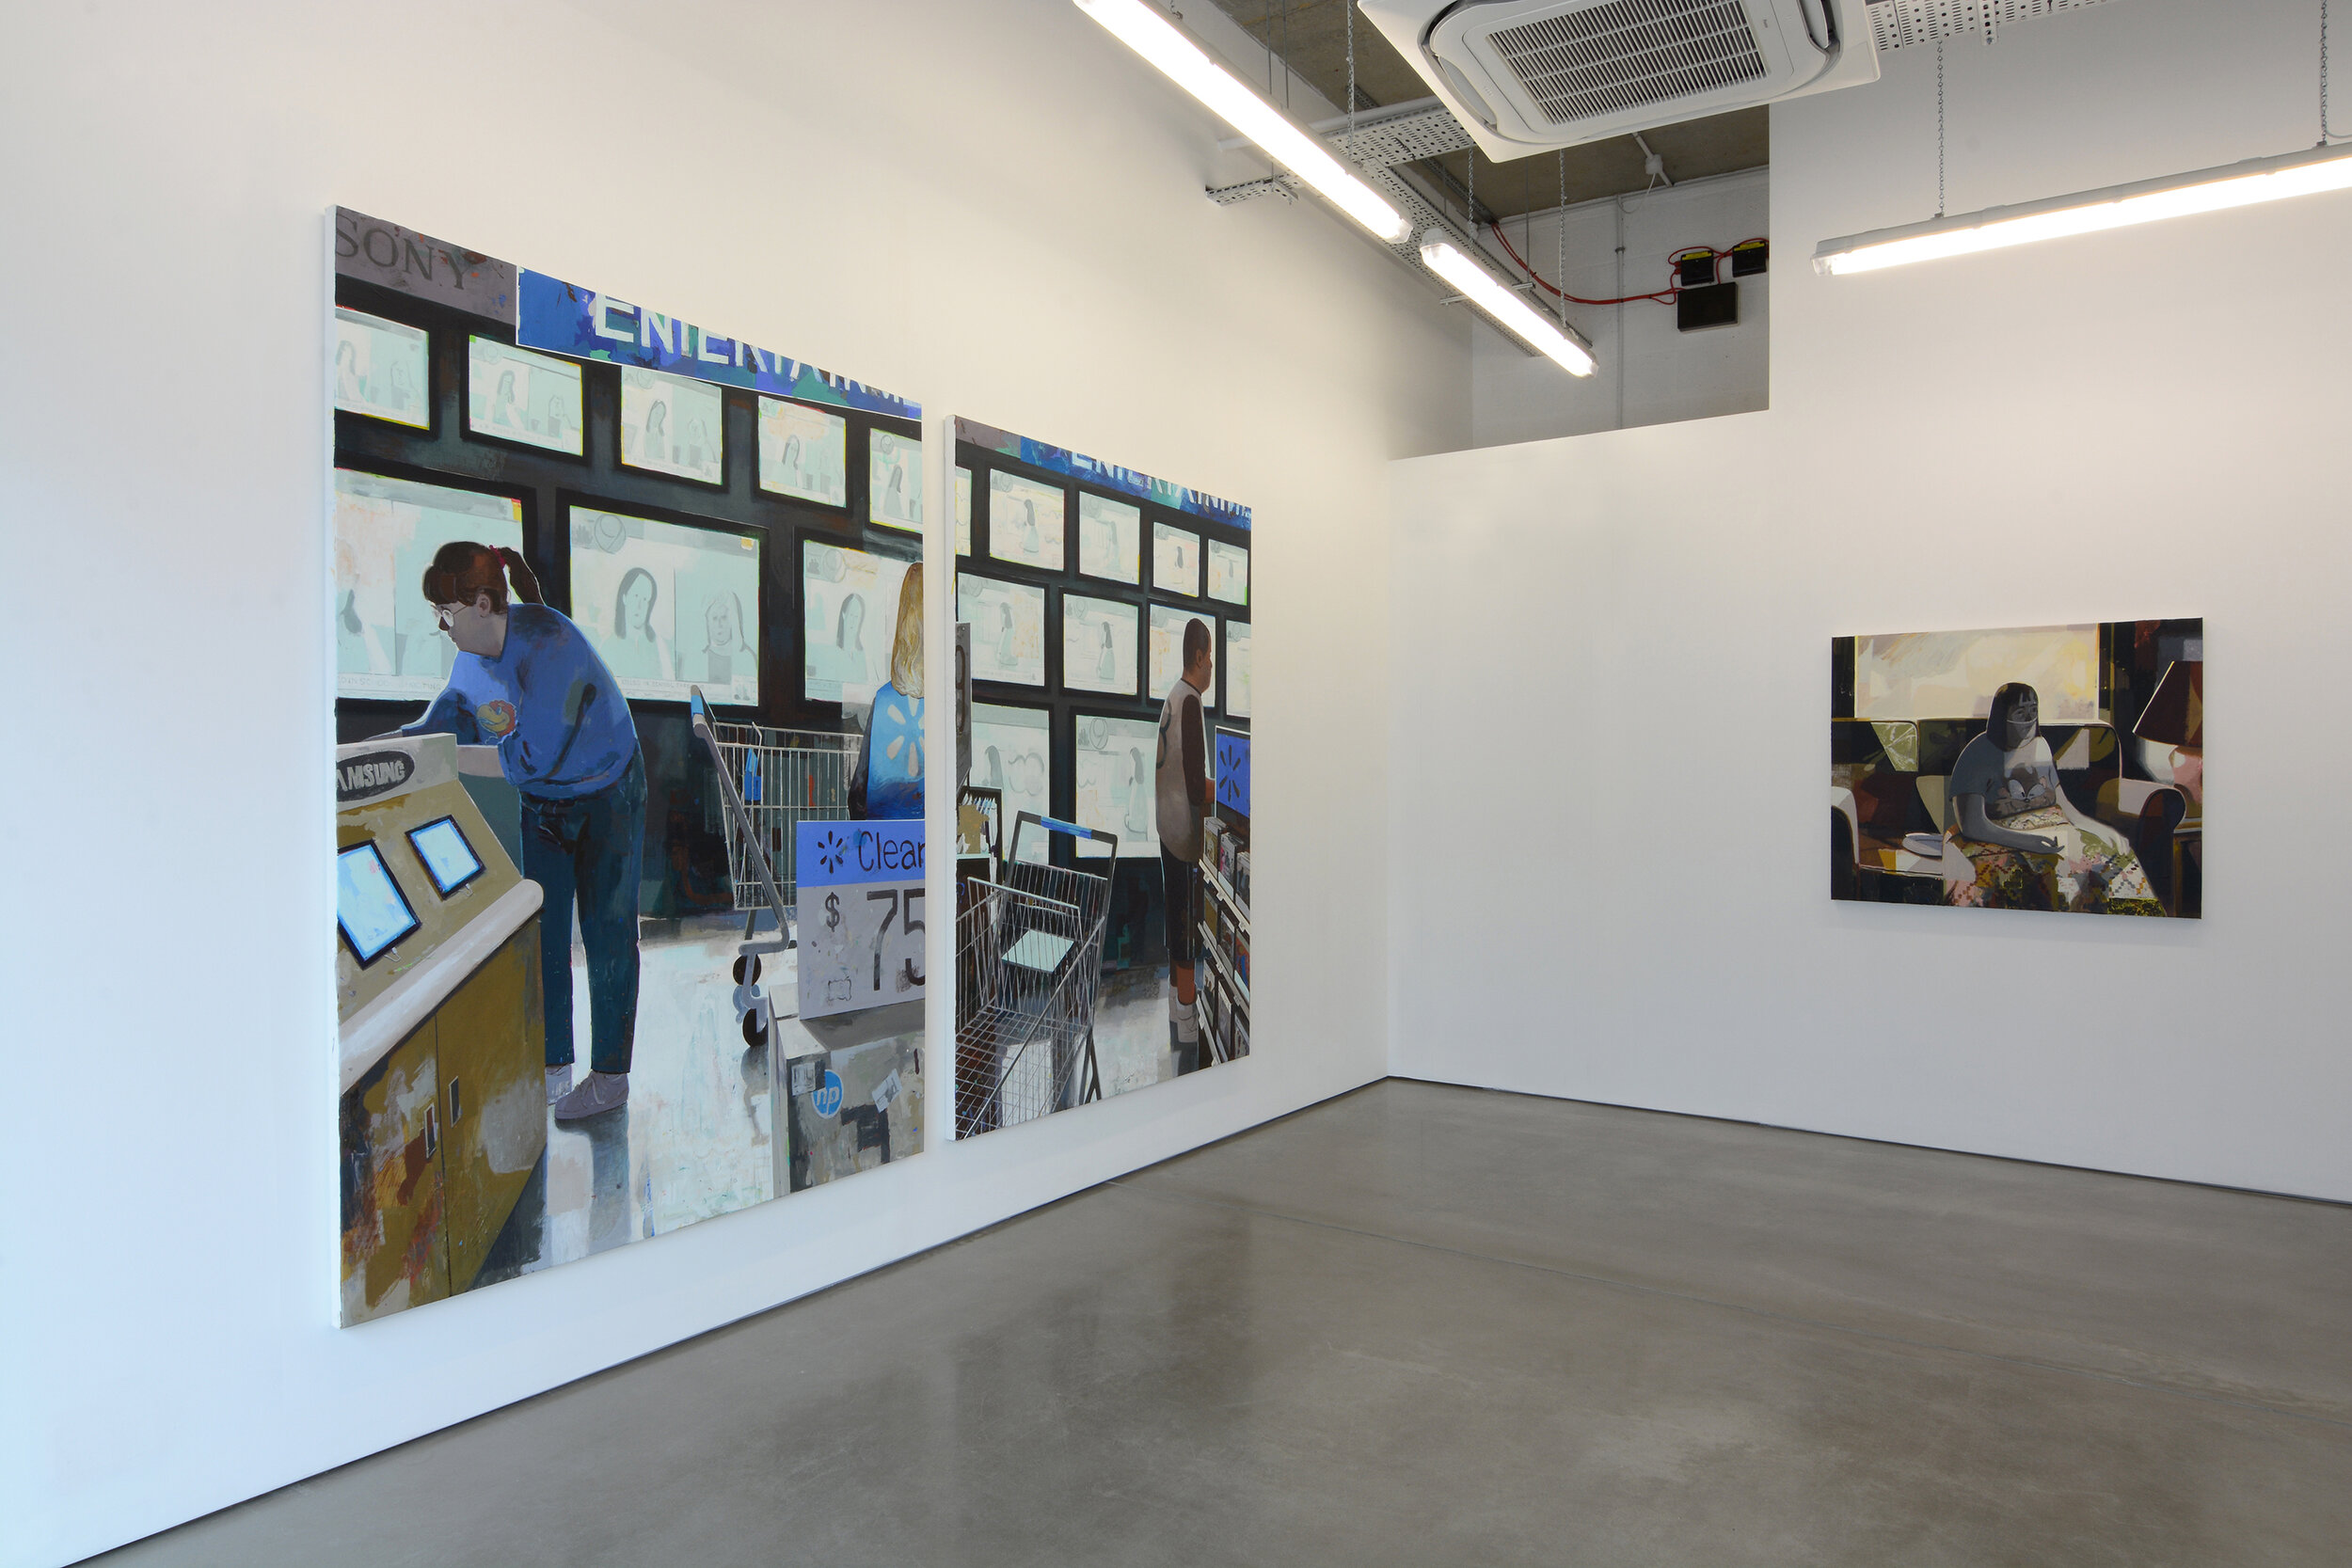  Installation view of  Collective Conscious  at Mother’s Tankstation, London, UK   April 15 - June 12, 2021 